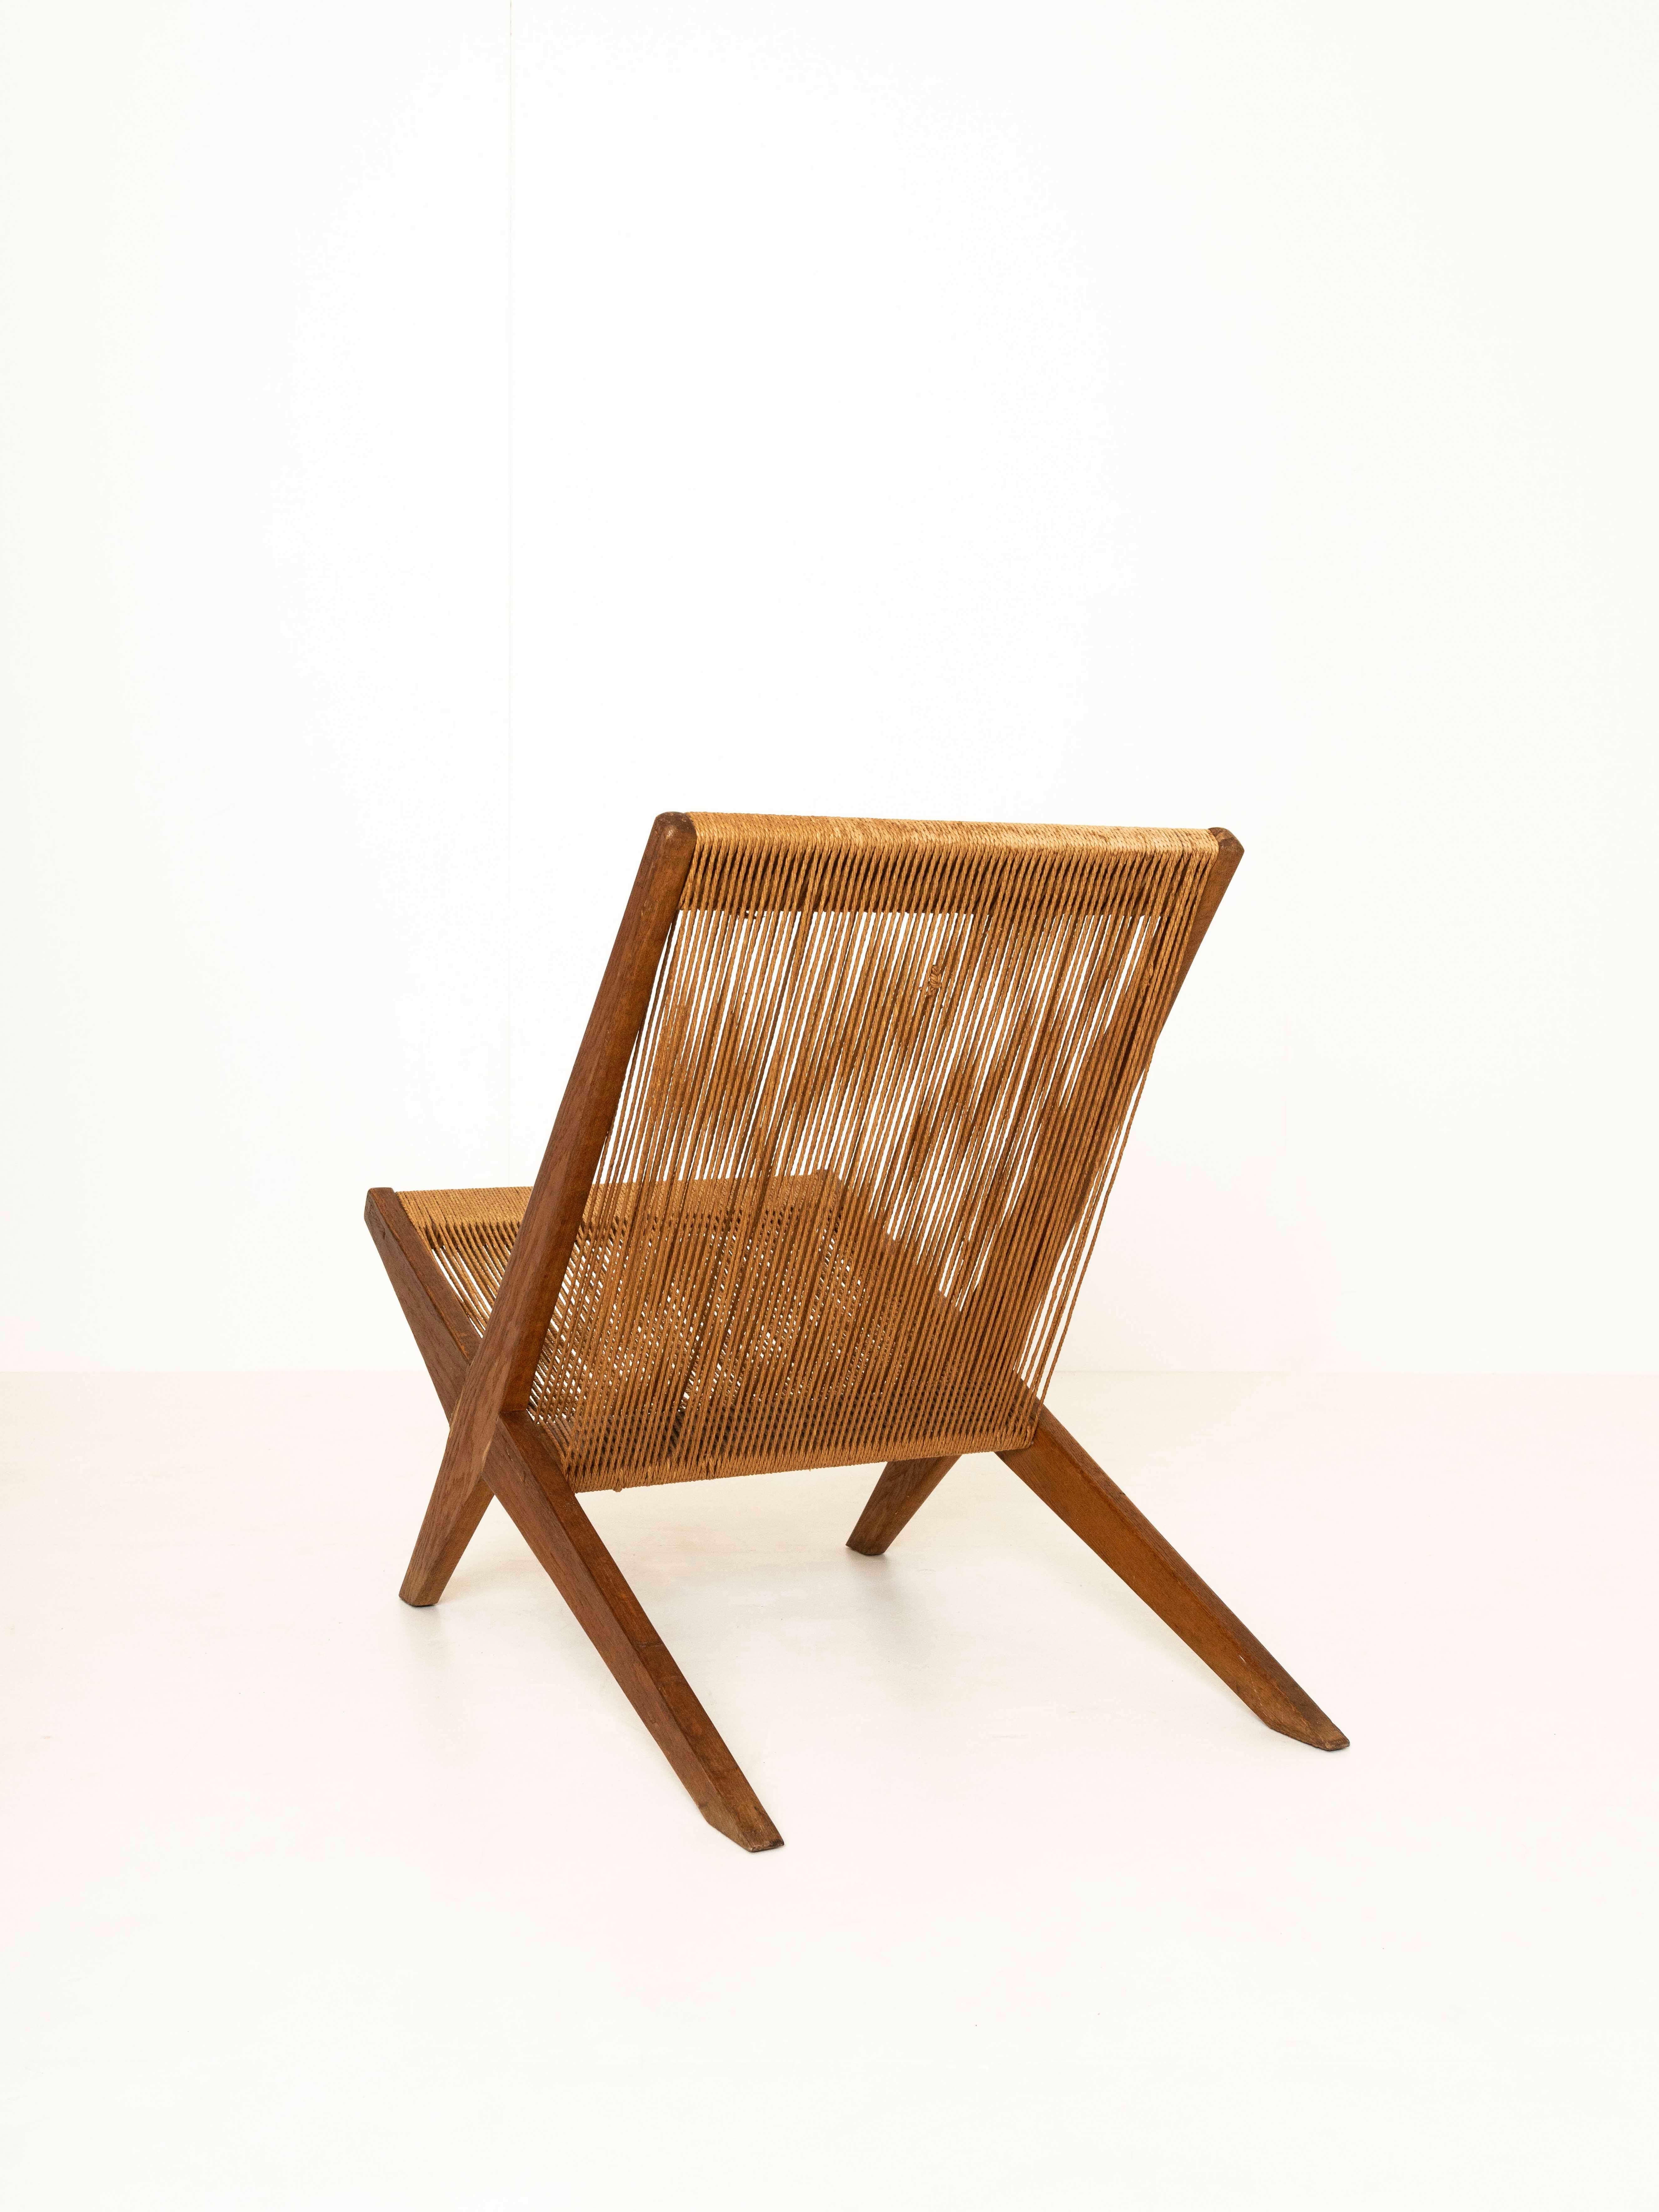 Impressive 'rope chair' attributed to Poul Kjaerholm and Jørgen Høj, Denmark 1960s. This chair is such an artistic item, it is almost more art than a piece of furniture. The chair is made of stained pine wood and rope pine. This exceptional chair is